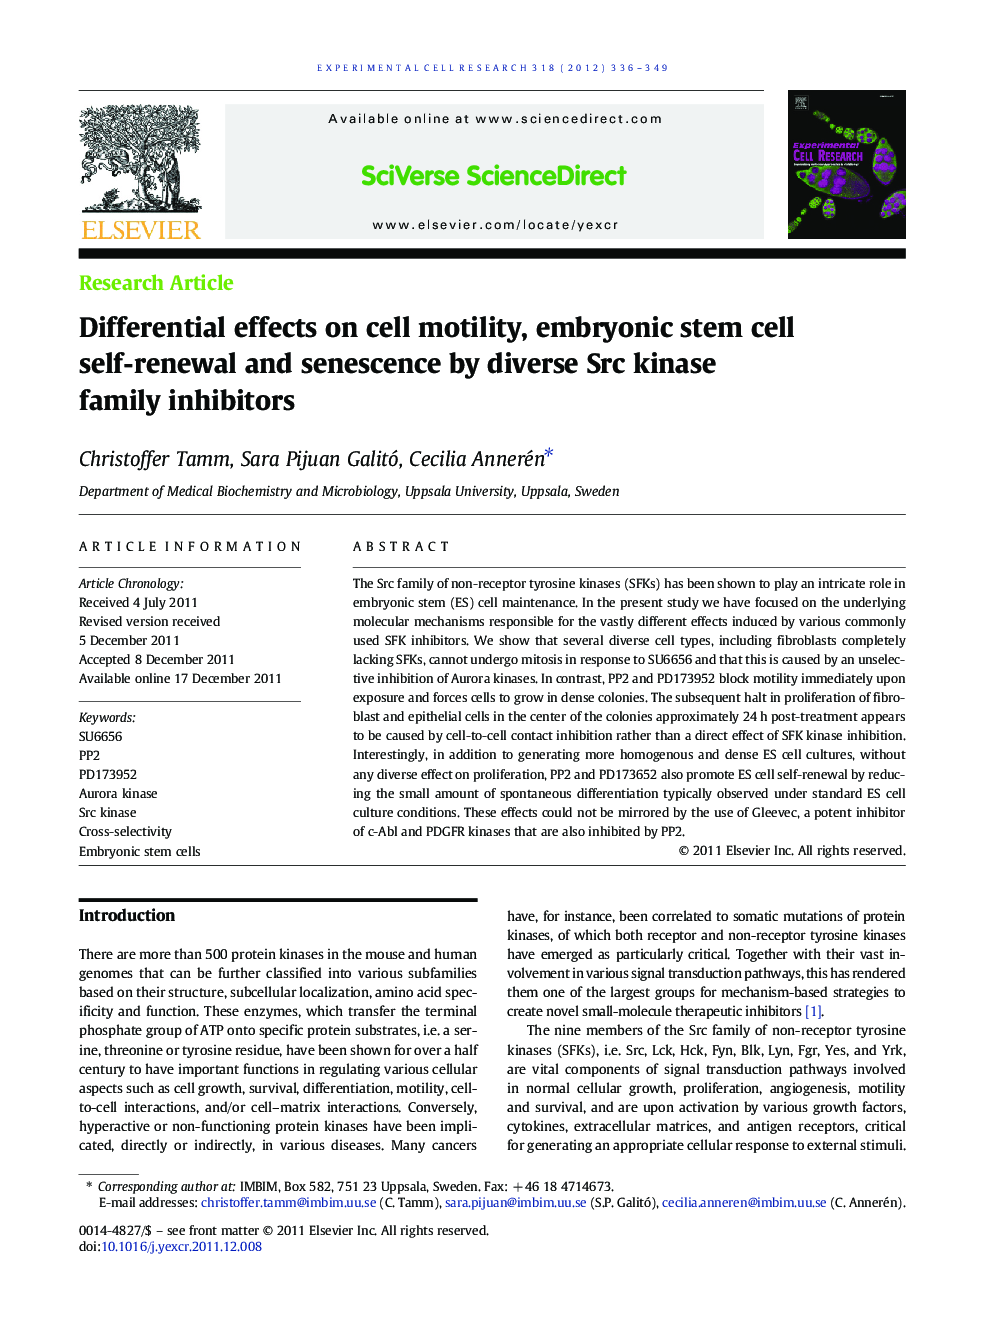 Differential effects on cell motility, embryonic stem cell self-renewal and senescence by diverse Src kinase family inhibitors